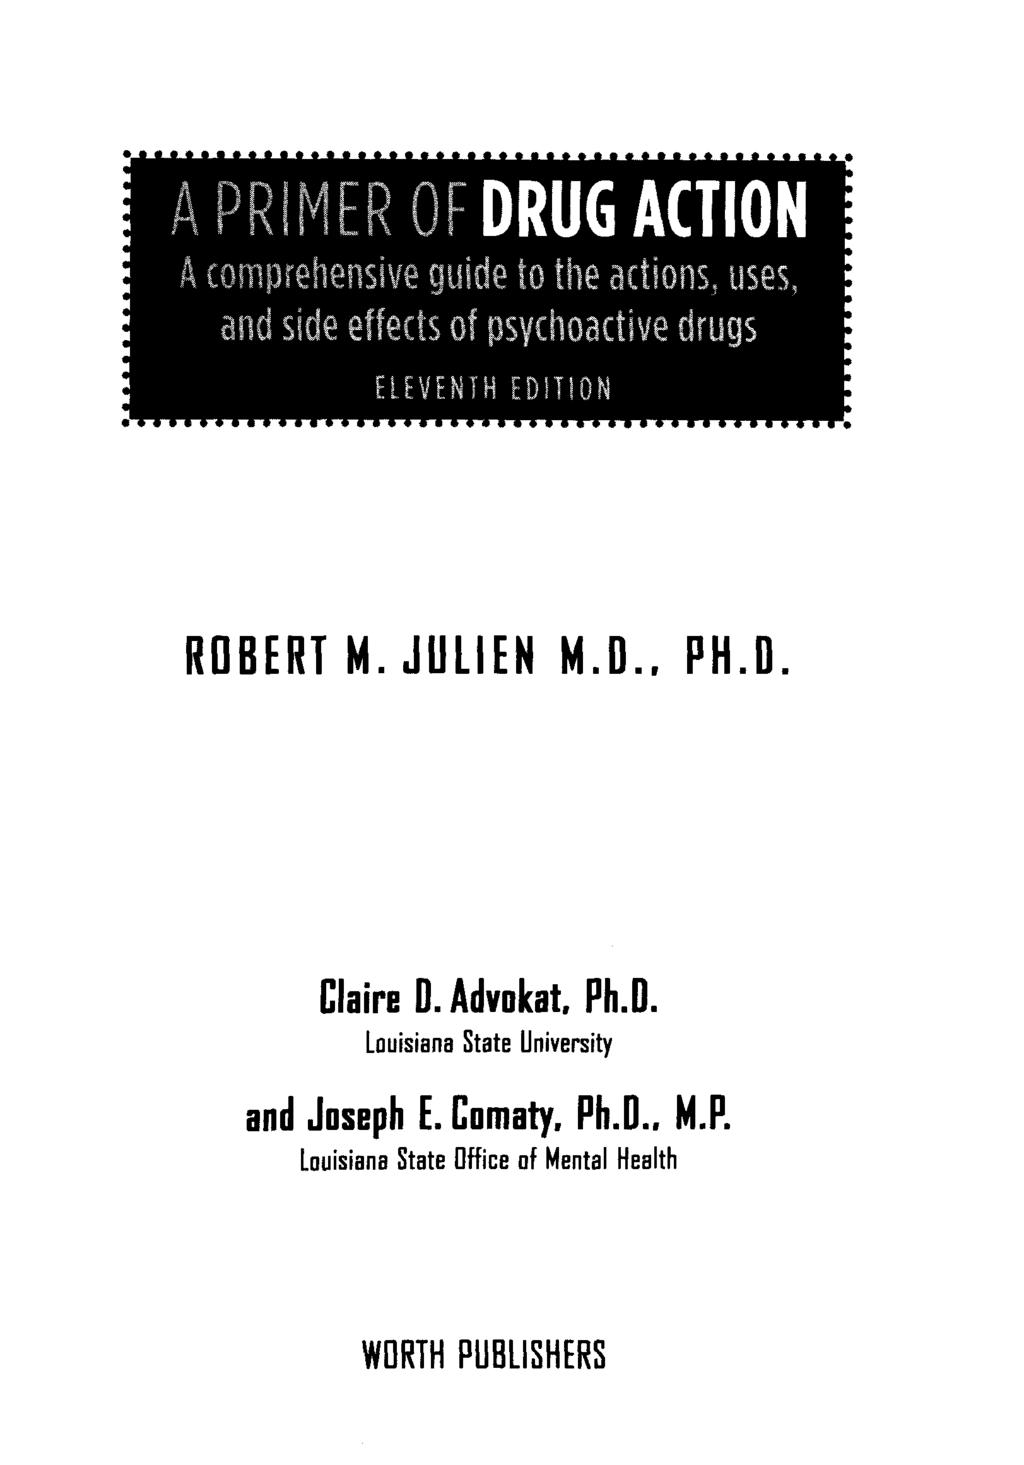 ^ PRIMER OF DRUG ACTION A comprehensive gyide to the actions, uses, and side effects of psychoactive drugs wm, ROBERT M.JULIEN M.D.. PH.D. Claire D.